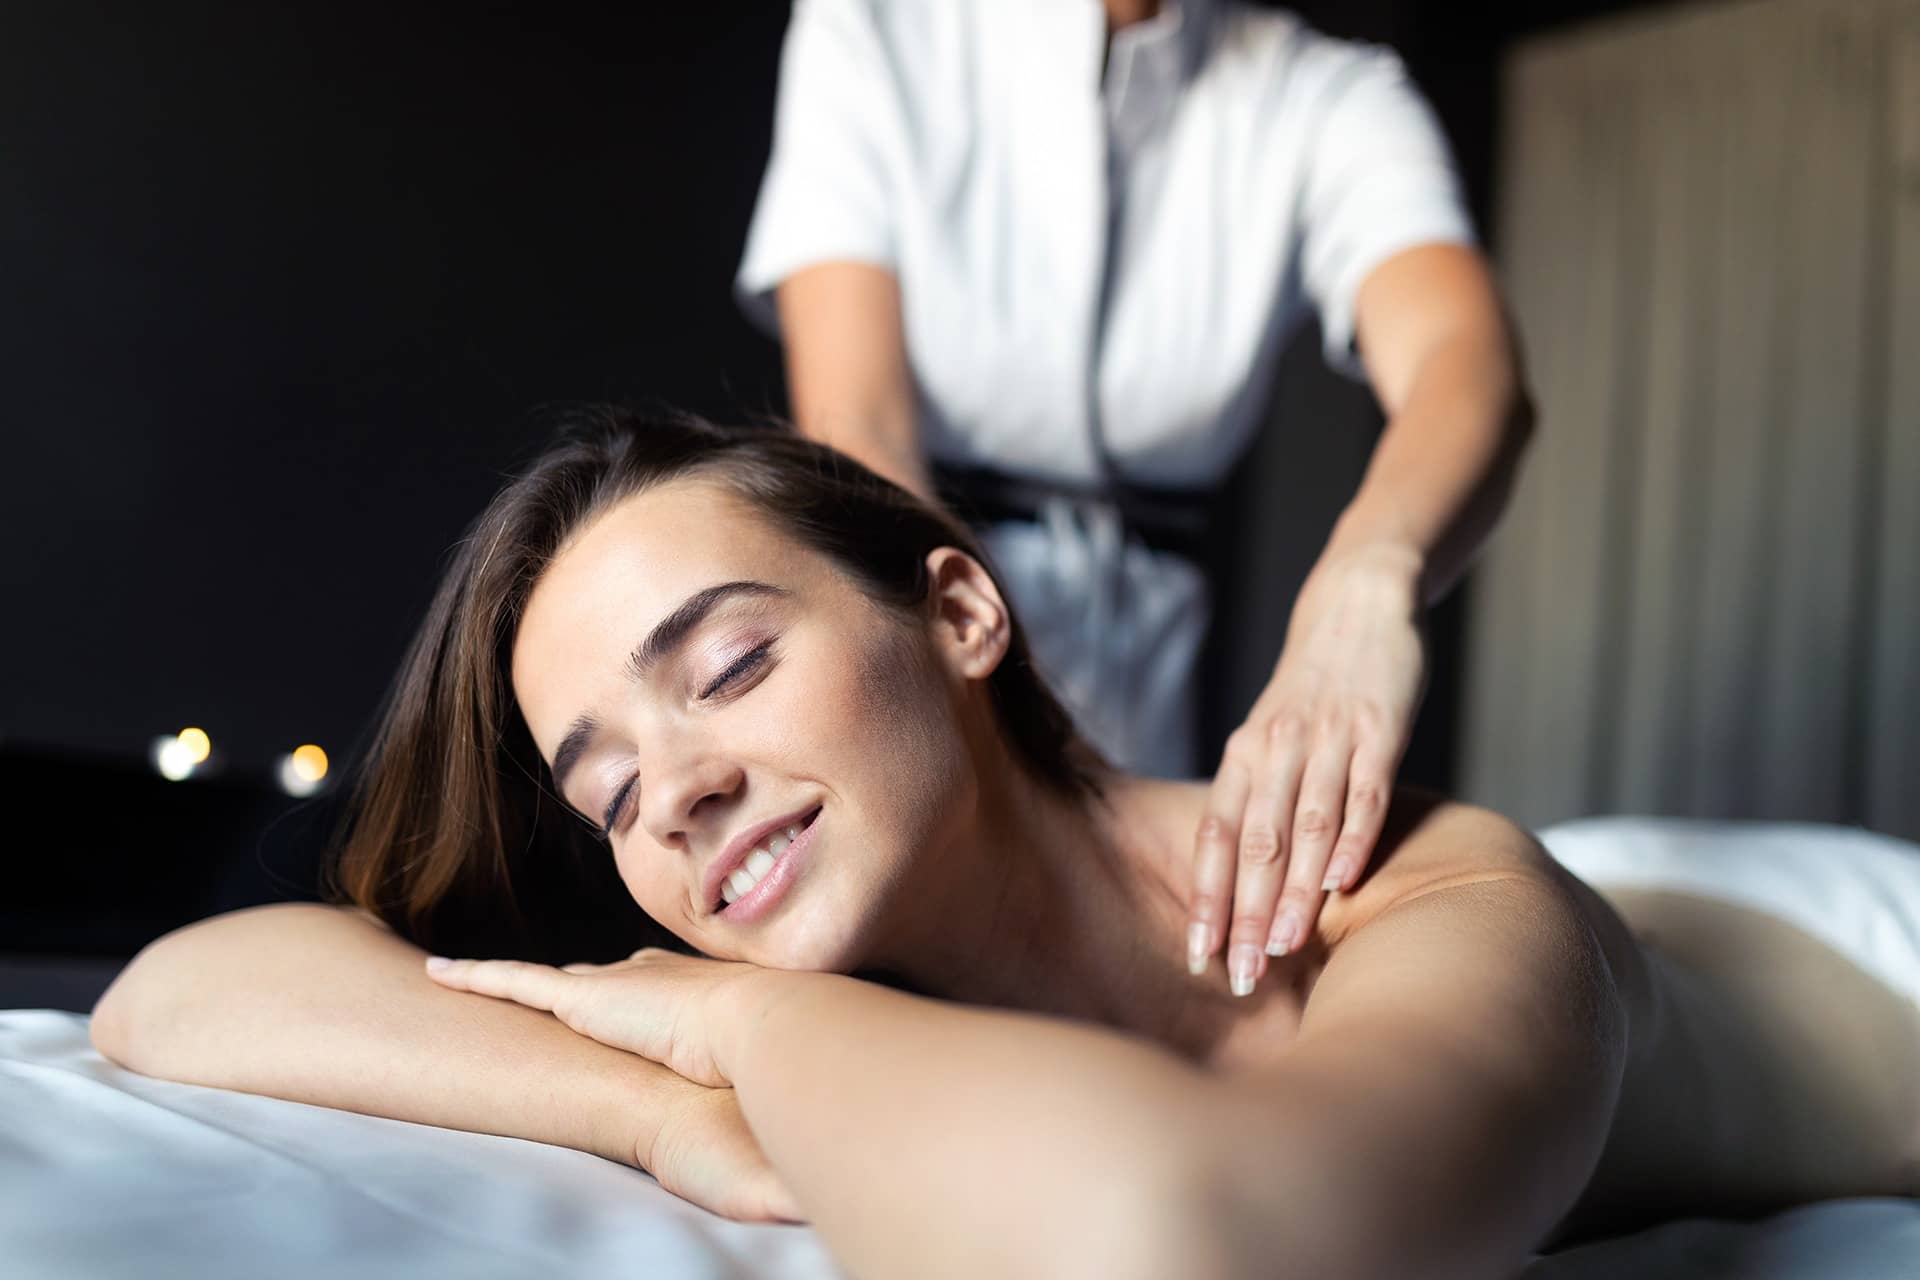 Massage, health, beauty and relaxation concept. Beautiful woman in spa salon